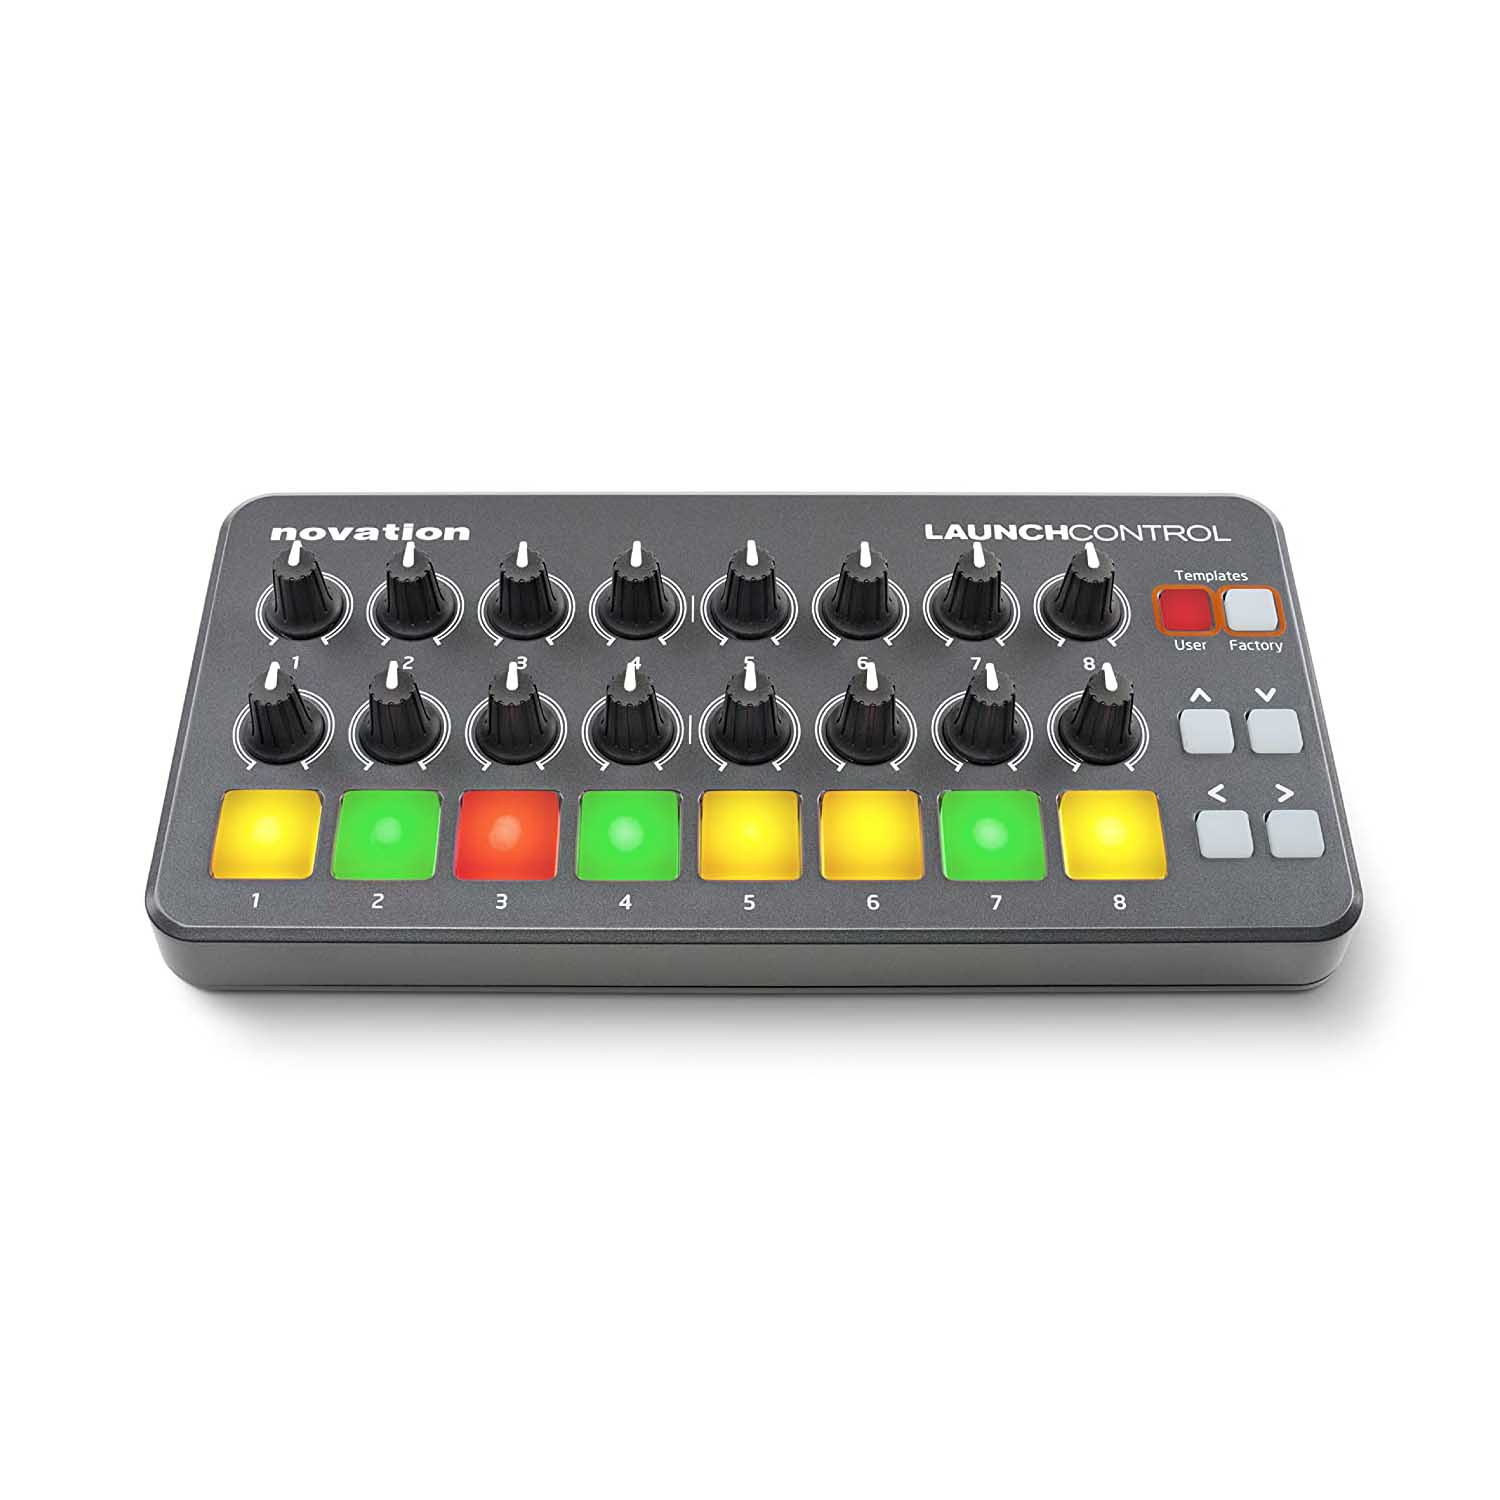 Novation NOVLPD04 Portable USB Midi DJ Controller with 16 Assignable Knobs and Eight Pads - Hollywood DJ